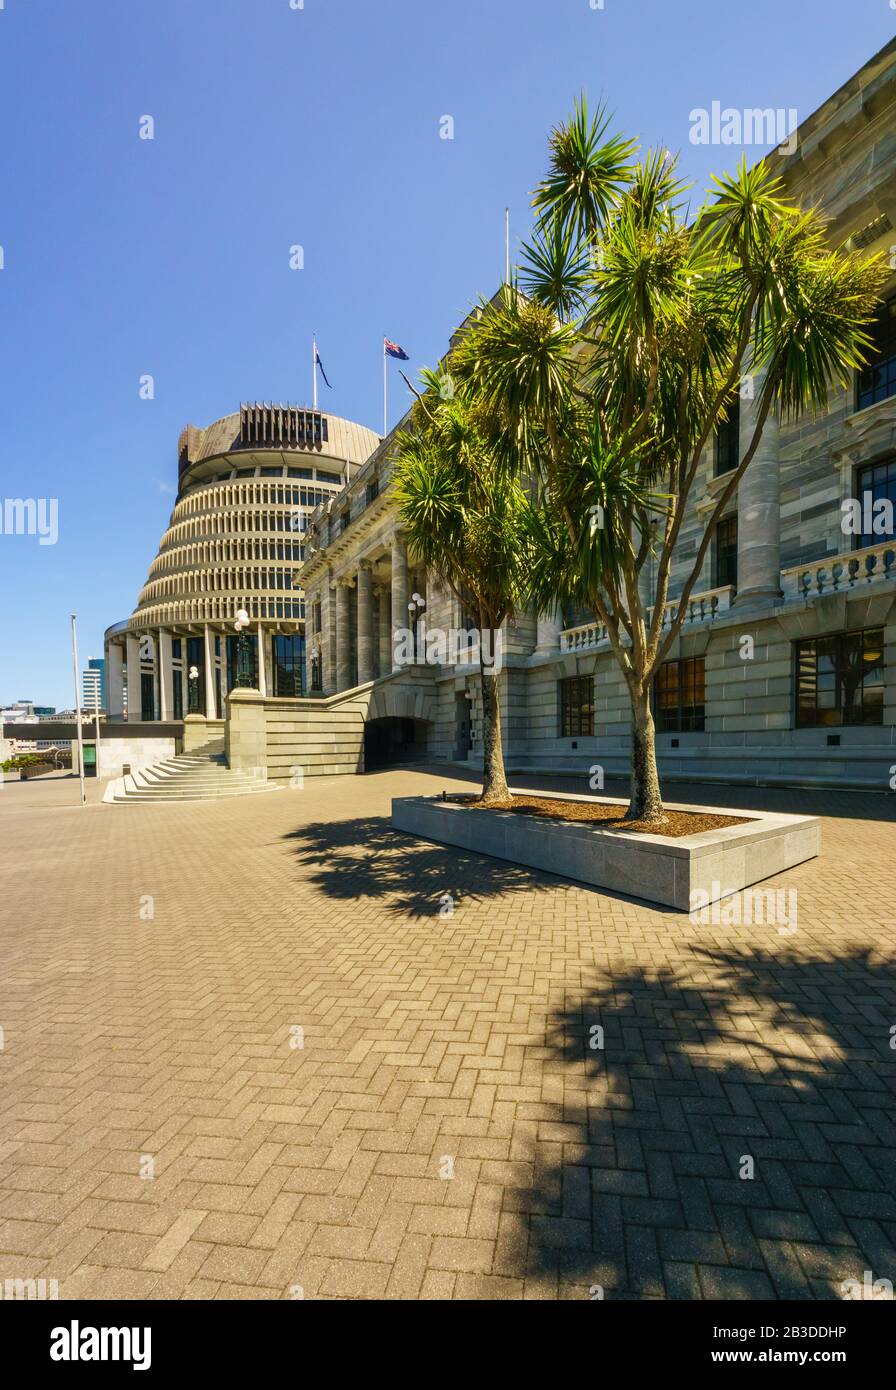 Parliament buildings located in Wellington, New Zealand. The Executive Wing is a distinctive shape and is commonly referred to as The Beehive. Stock Photo